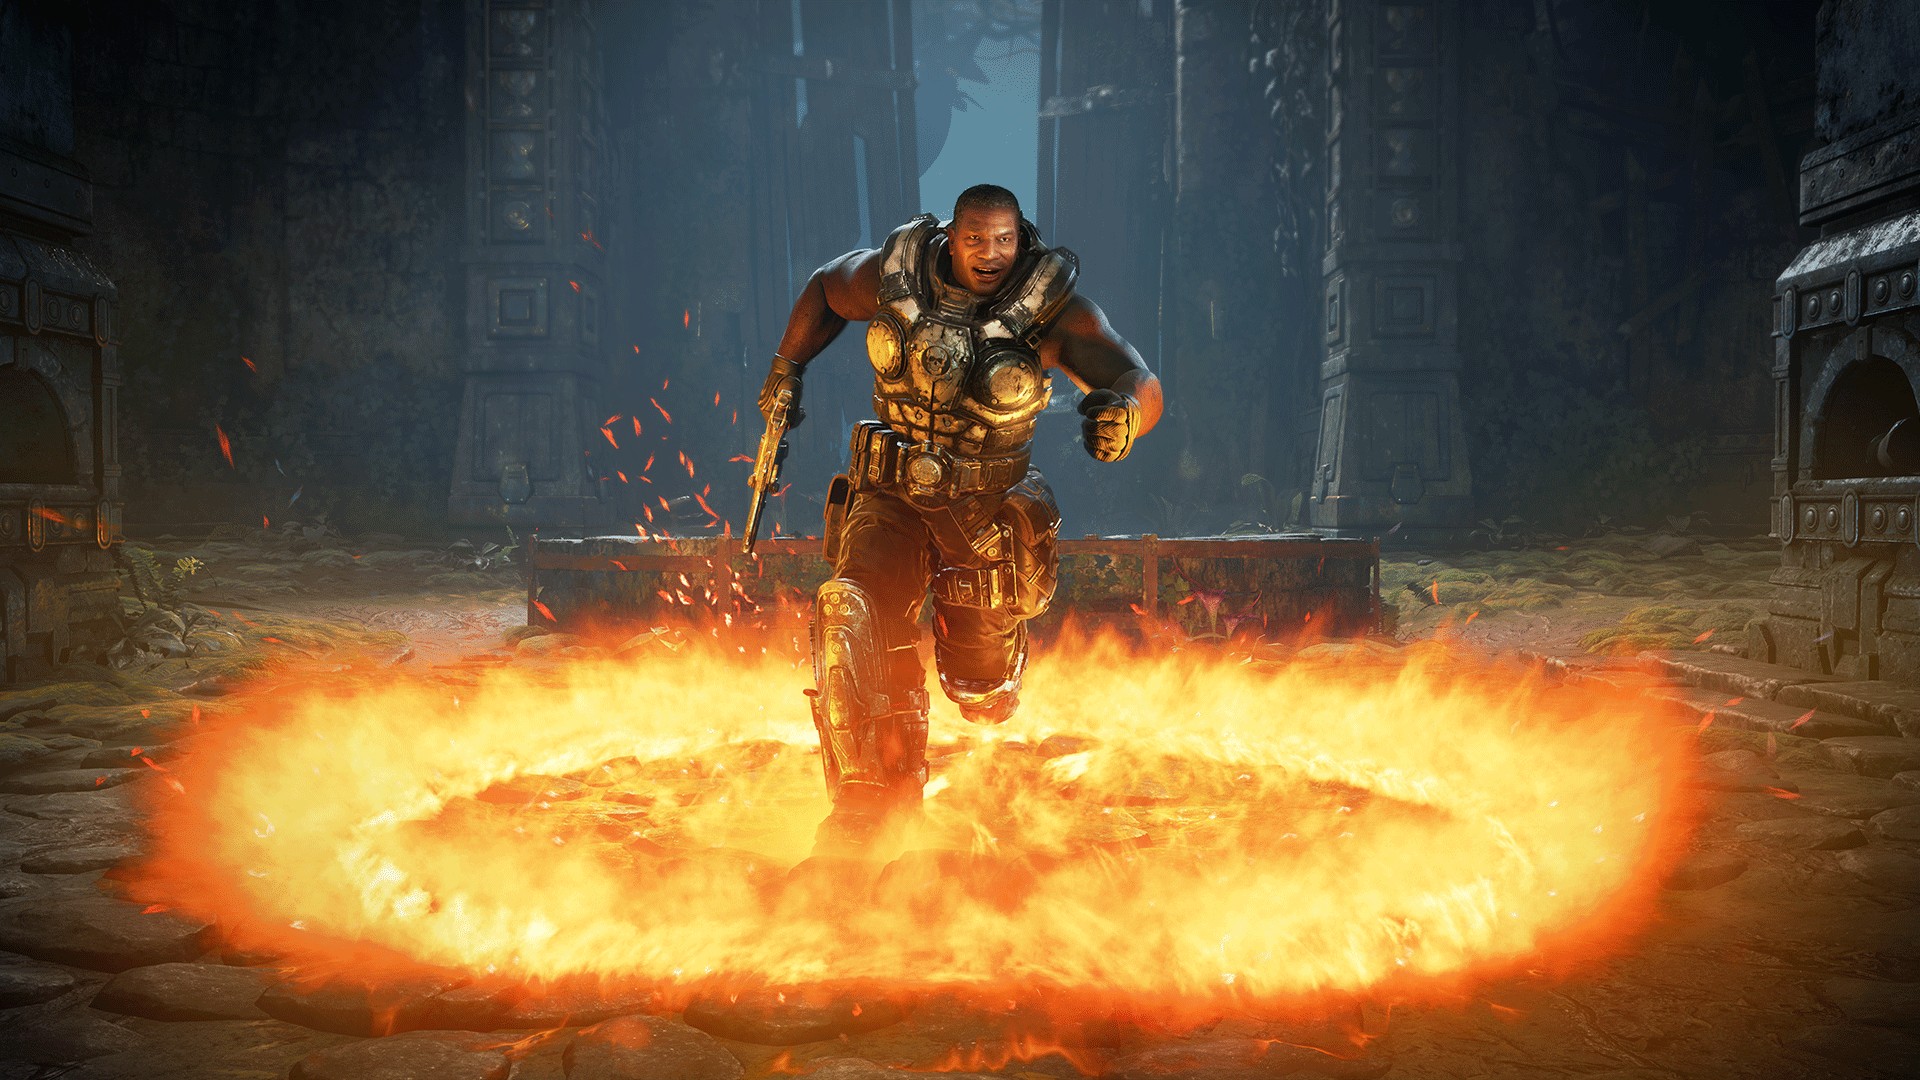 PC players can destroy Xbox One players in Gears of War 4 this weekend